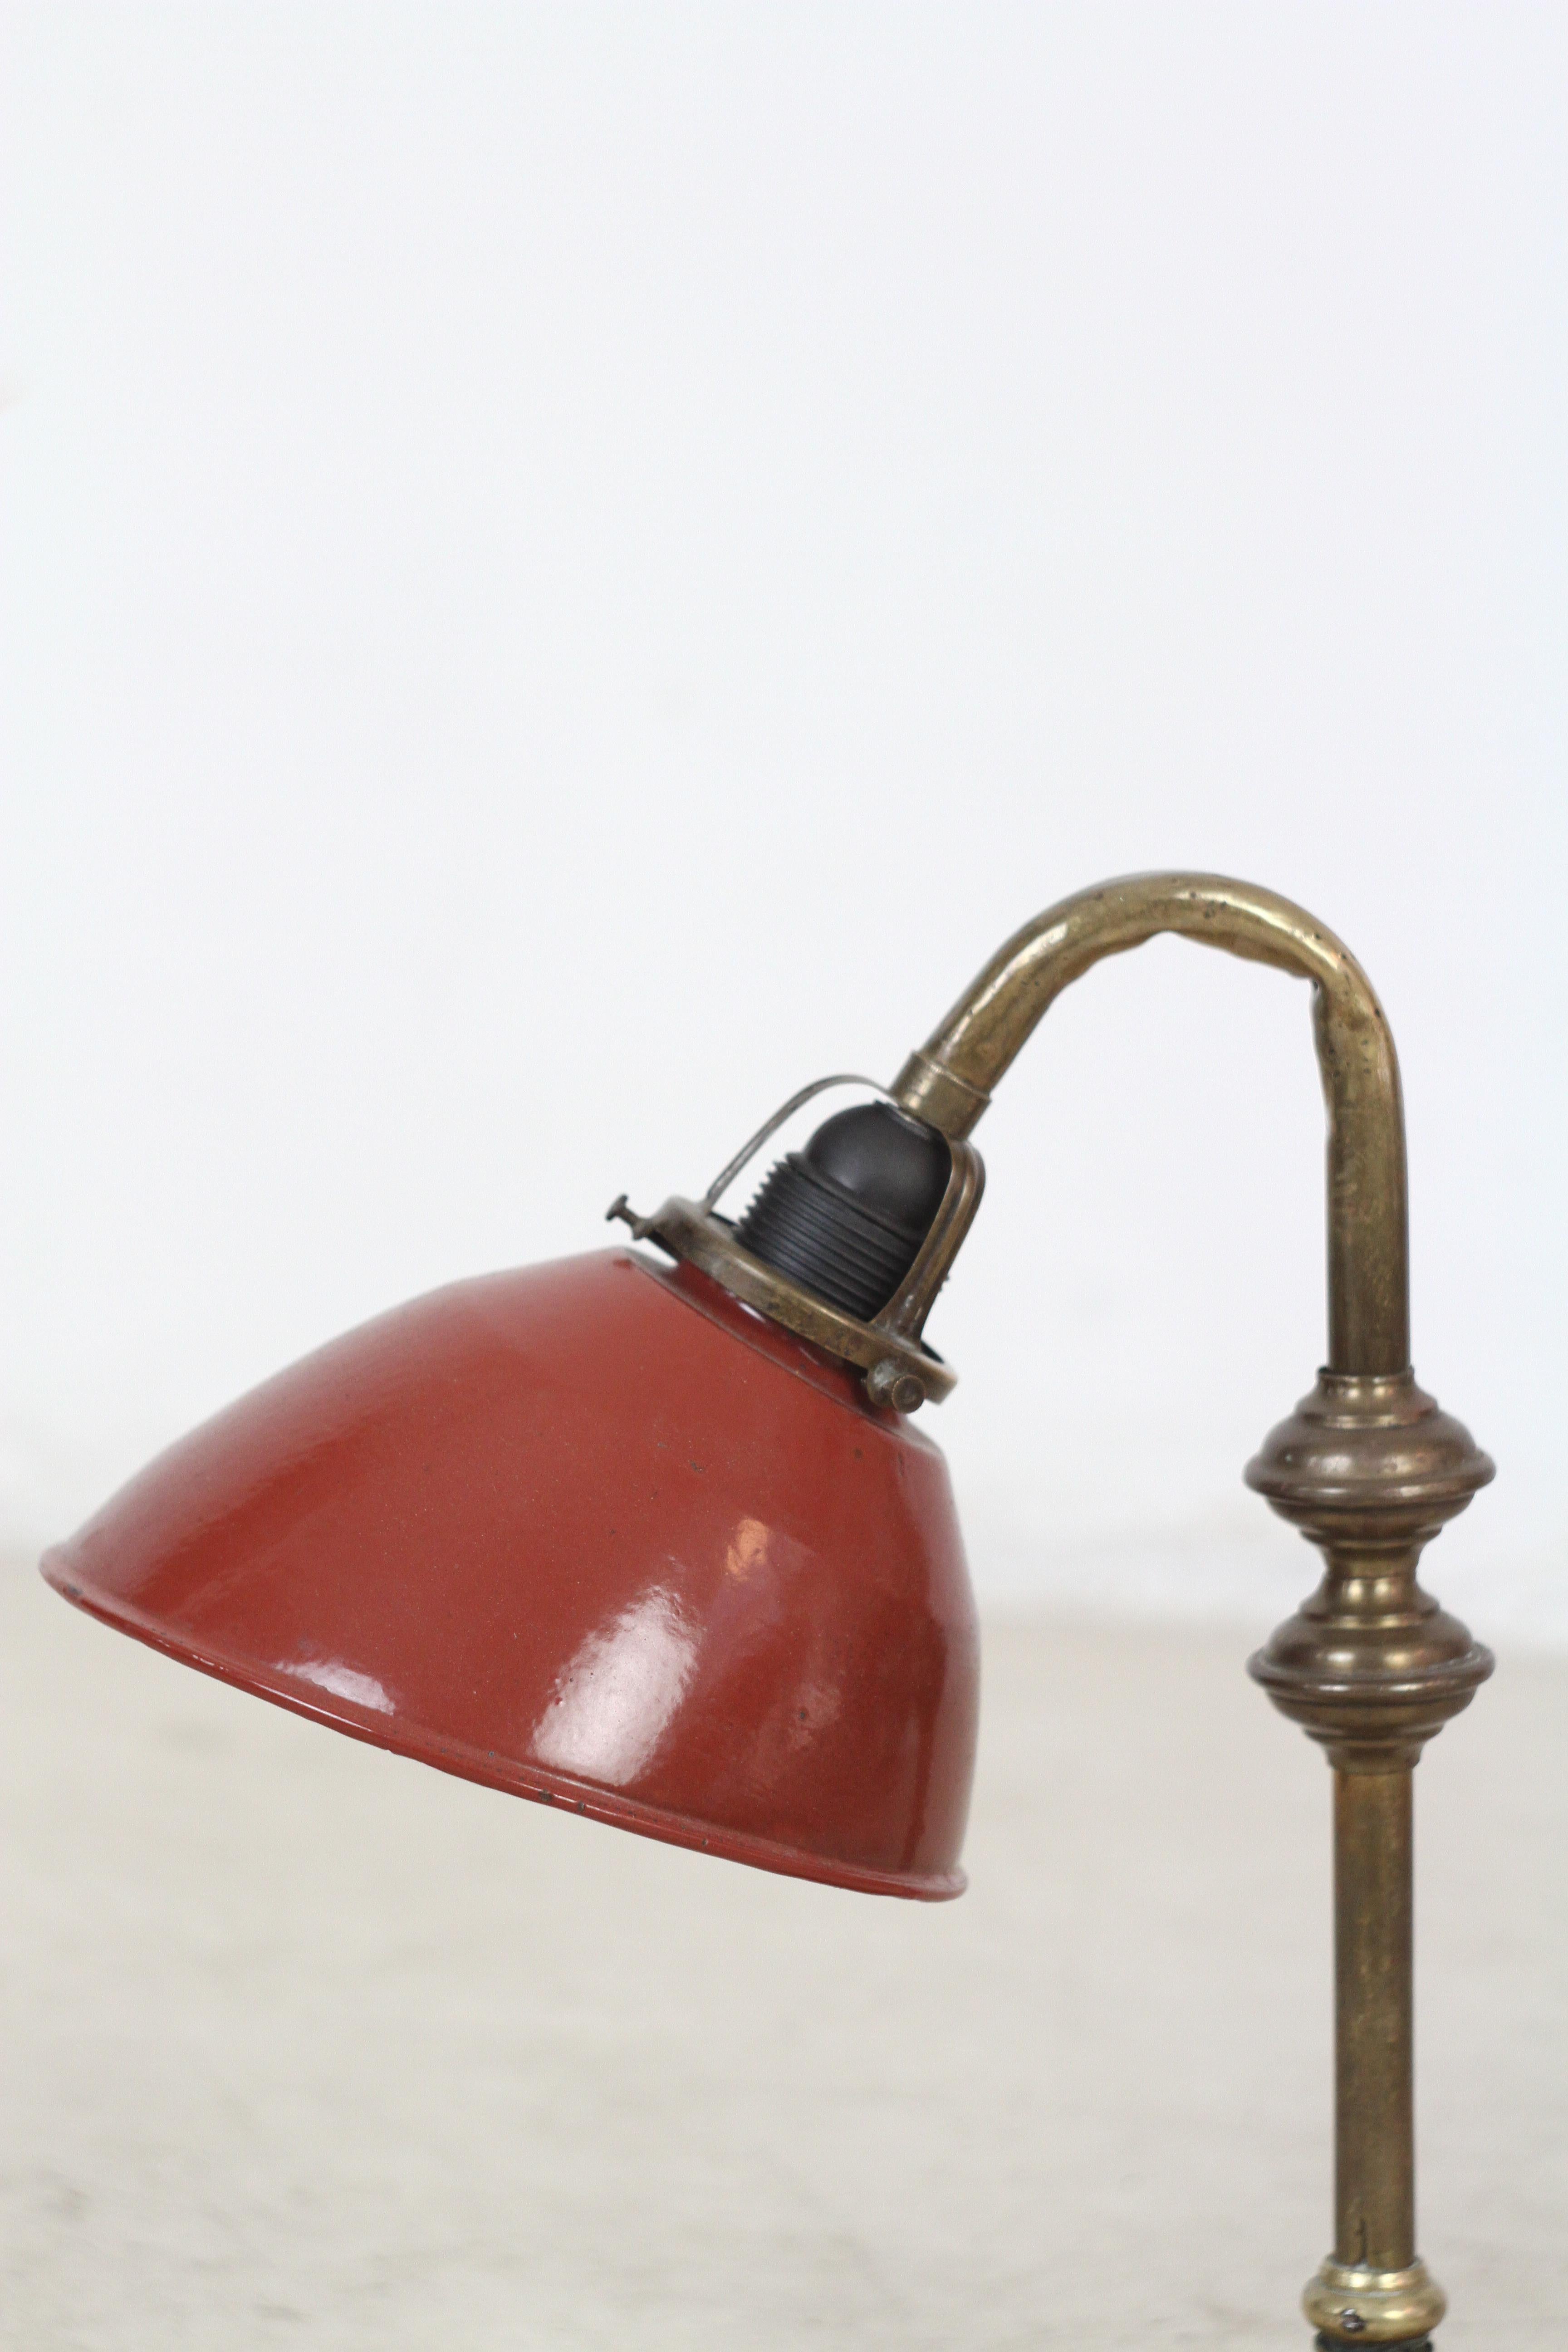 Ornate and beautifully made 1920s desk lamp with frame and base of patinated copper and brass. Its mounted with the original burgundy red enameled iron shade. The socket was changed fitting for E27 large lightbulb.